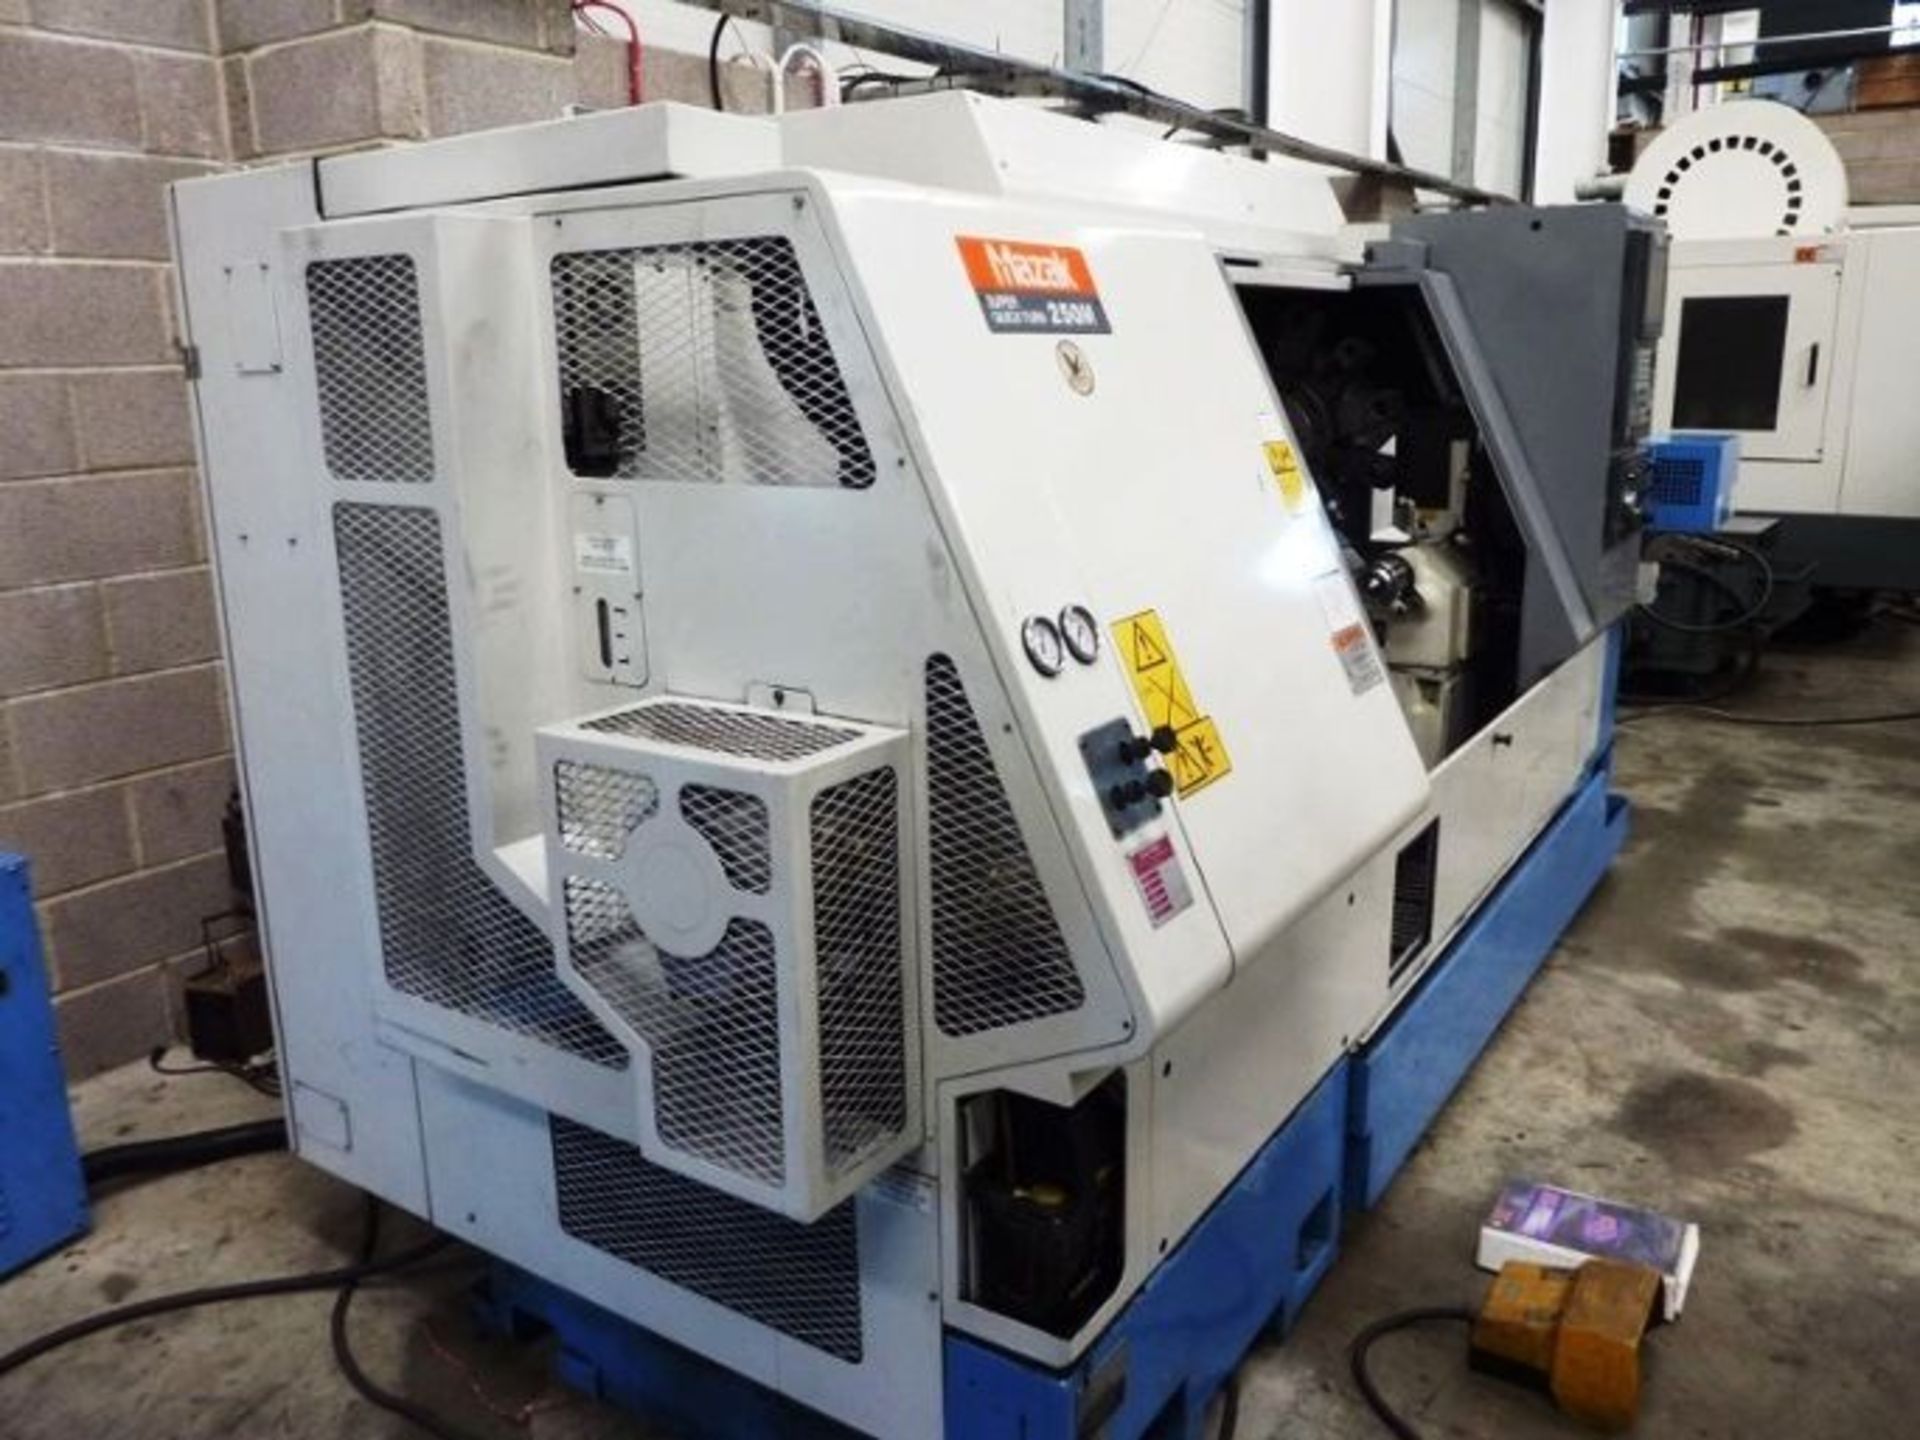 11.81"X39.6"MAZAK SQT 250M CNC 3-AXIS TURNING CENTER LATHE WITH LIVE TOOLING, S/N 165223, NEW 2003 - Image 9 of 16